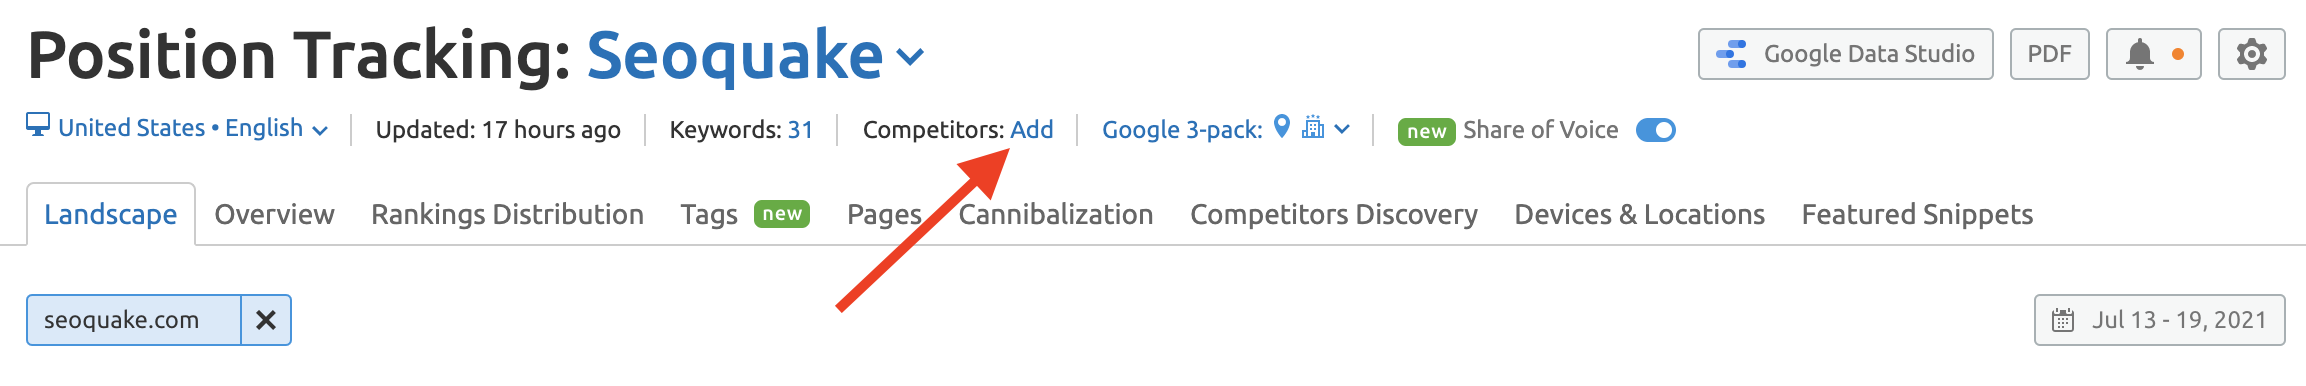 How do I add a competitor in Position Tracking? image 2